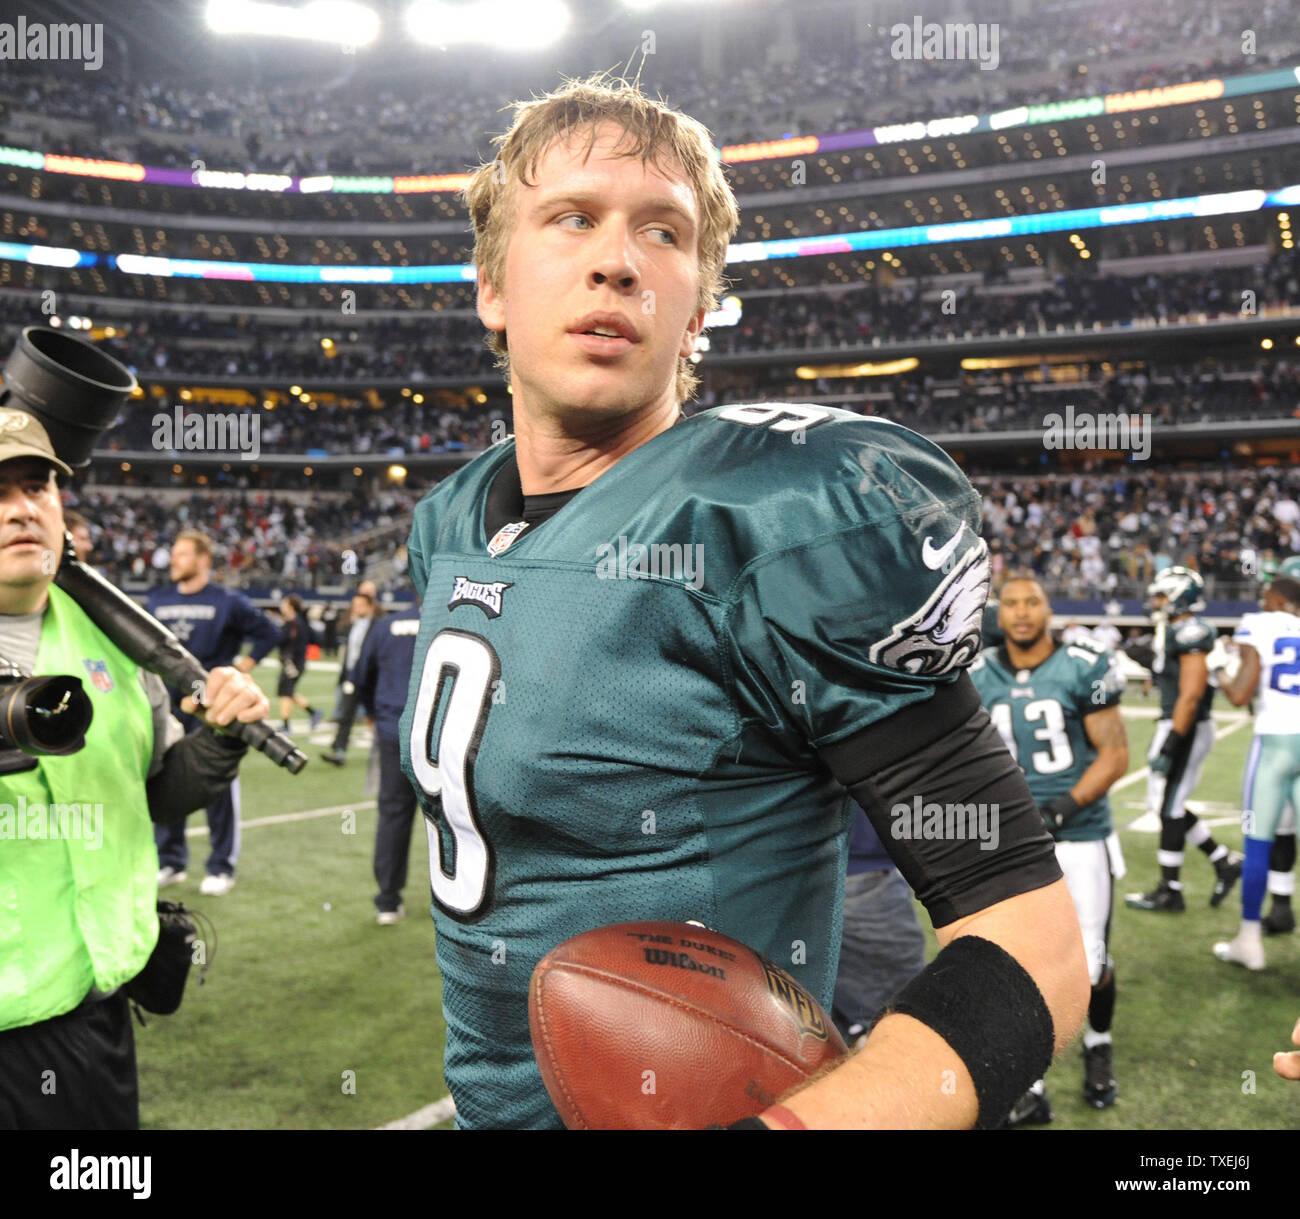 Philadelphia Eagles Nick Foles walks off the field following the Eagles  24-22 victory over the Dallas Cowboys at AT&T Stadium in Arlington, Texas  on December 29, 2013. With the win the Eagles